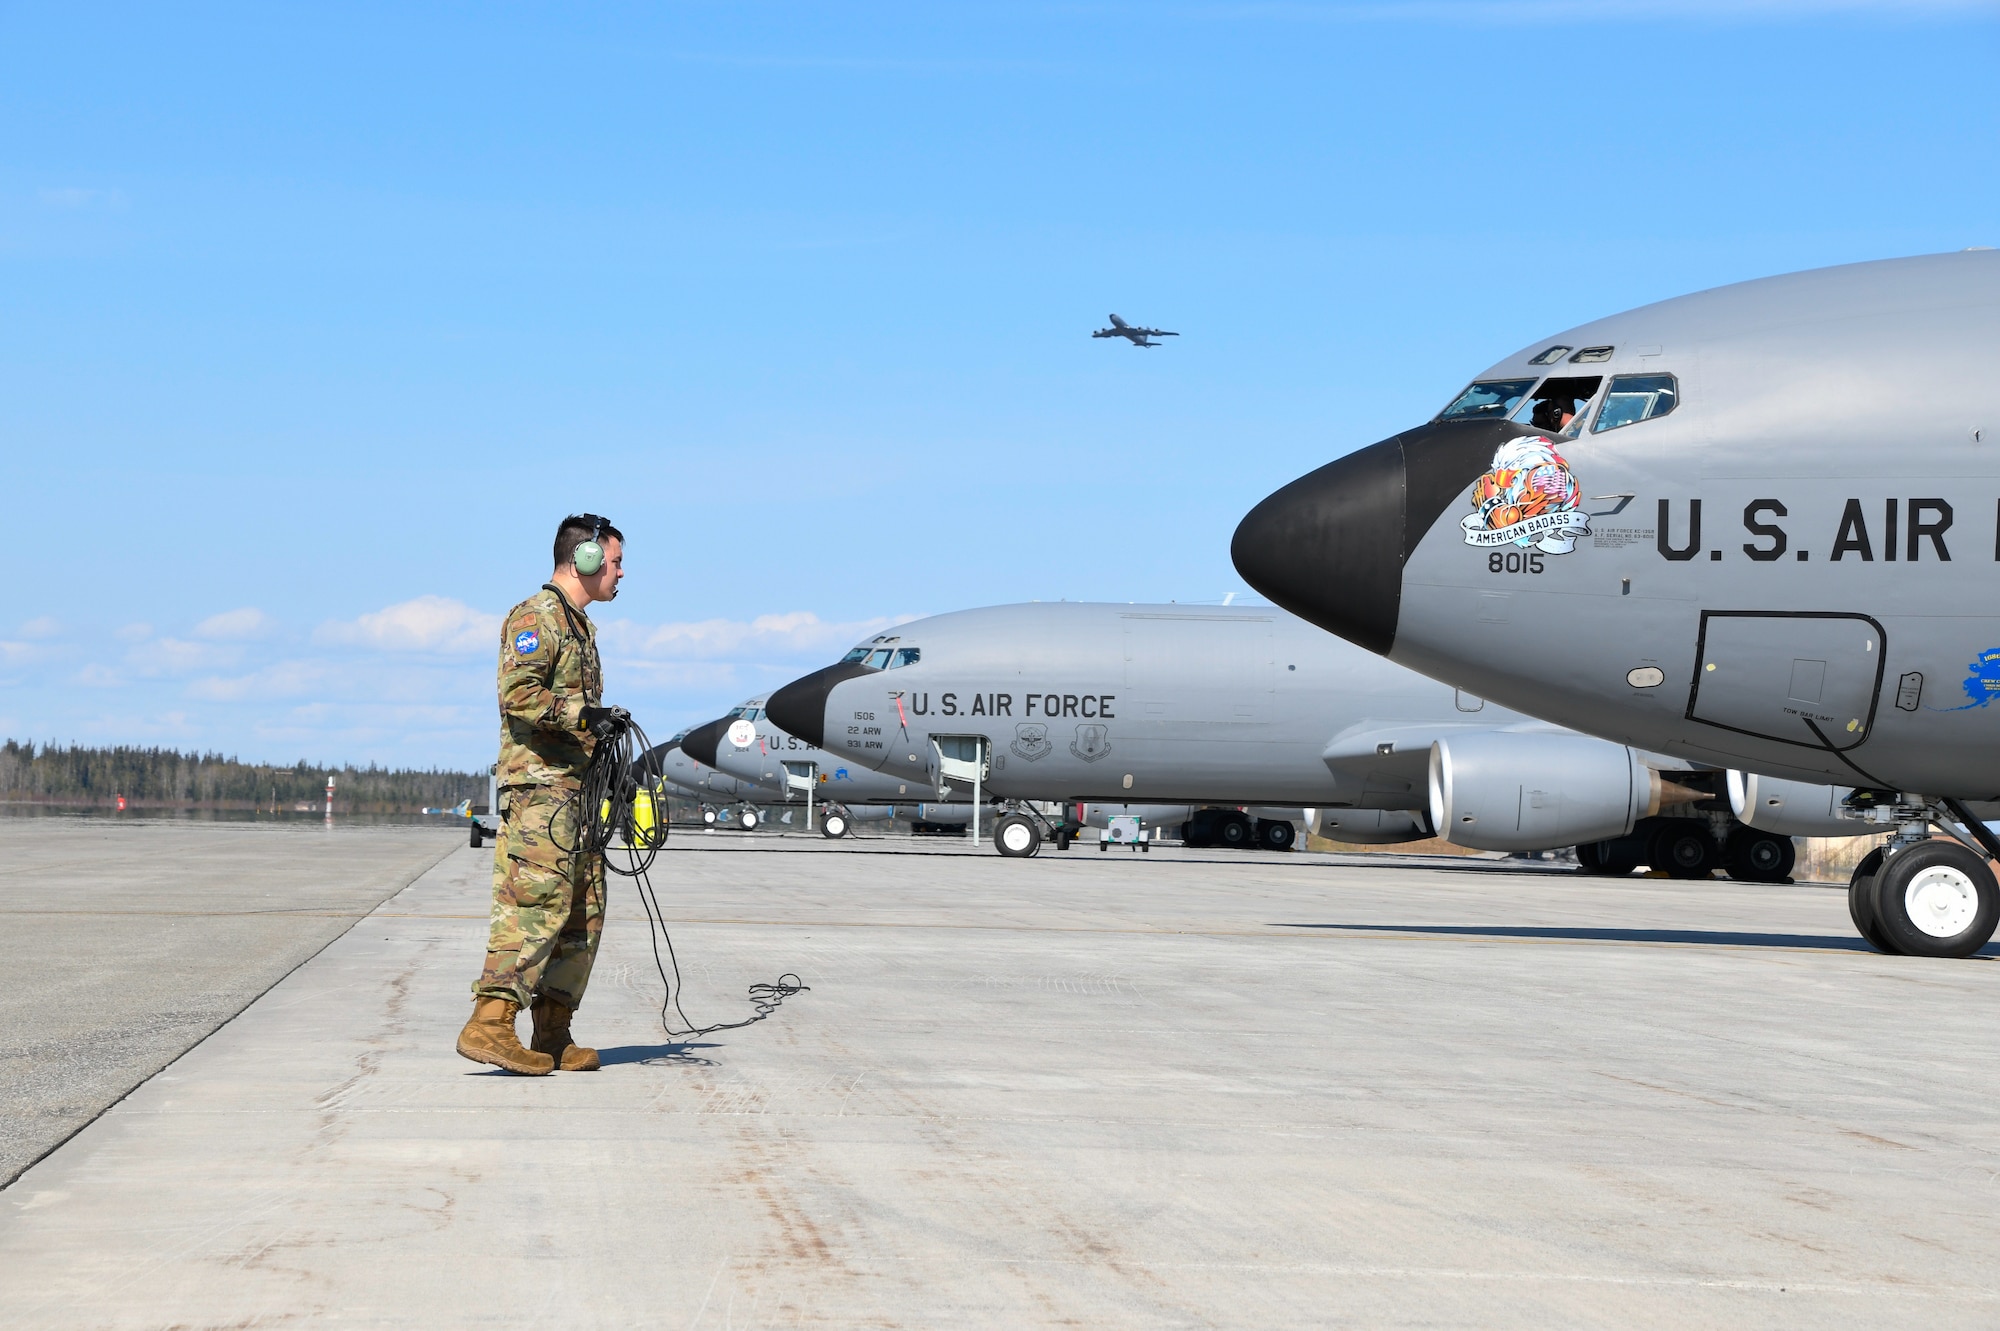 Staff Sgt. David Thurman, a crew chief with the 168th Wing, Alaska Air National Guard, prepares to send off a KC-135 Stratotanker pilot at Eielson Air Force Base. The Alaska Air National Guard KC-135s provide air refueling, joint force lethality, and deter aggression across the Pacific. (U.S. Air National Guard photo by Senior Master Sgt. Julie Avey)